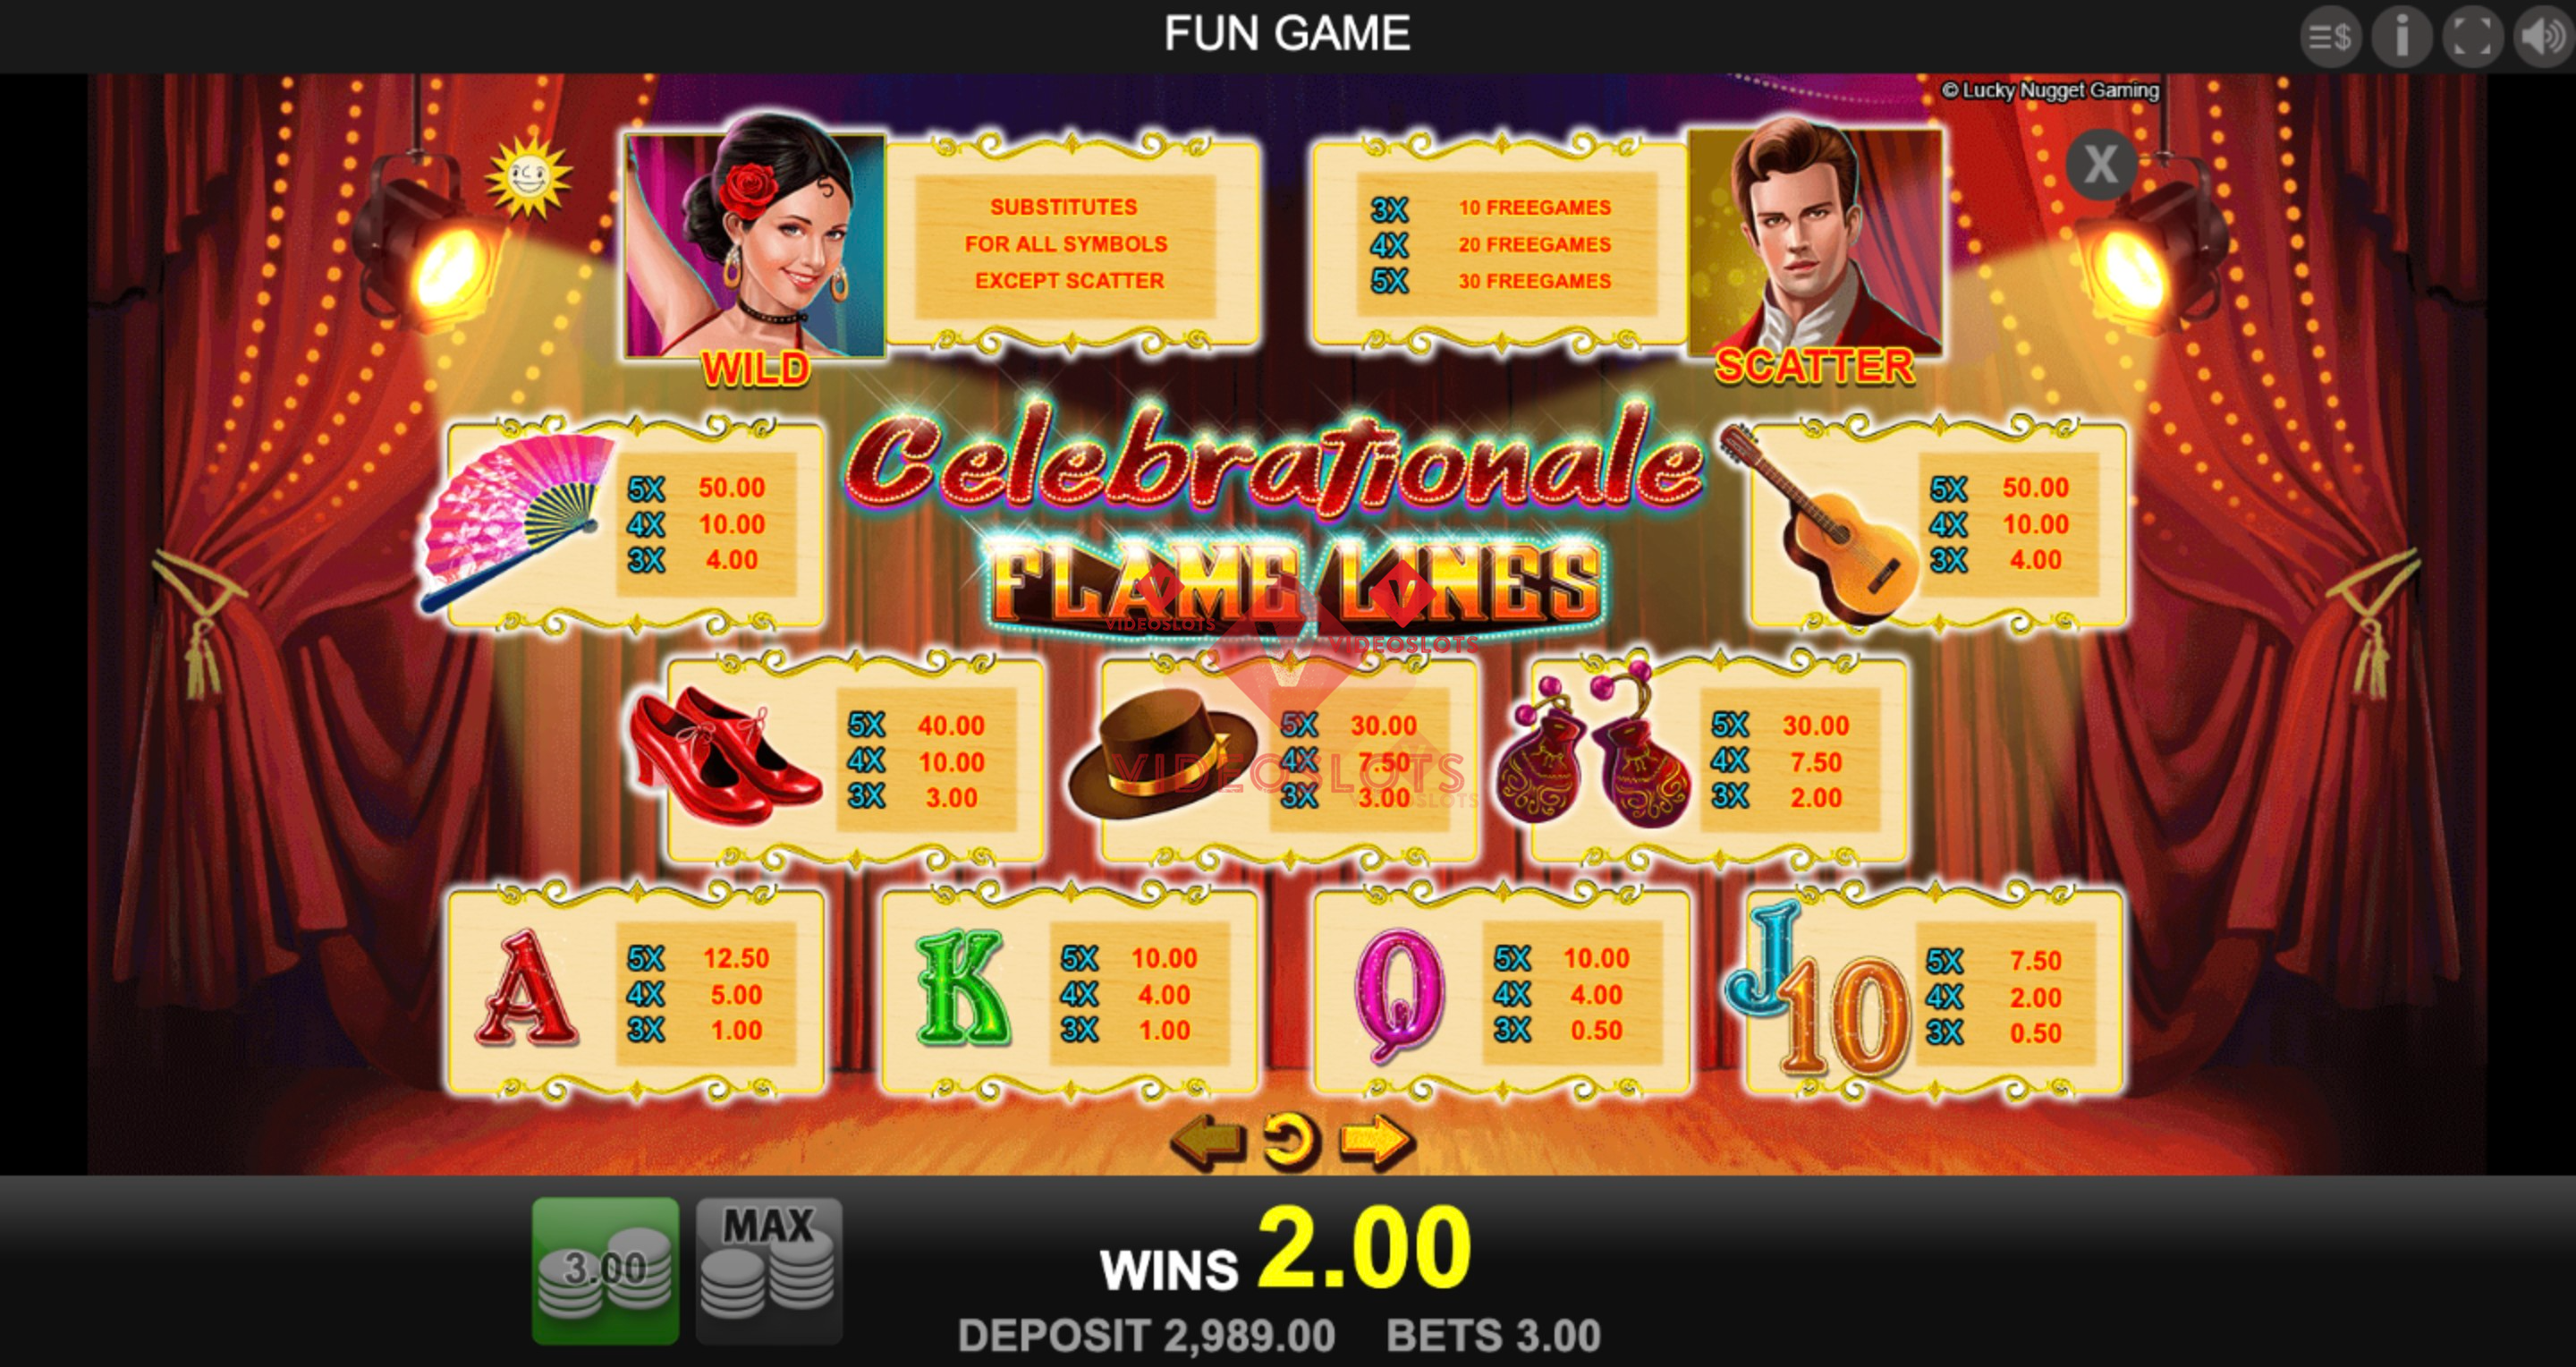 Pay Table for Celebrationale Flame Lines slot from Merkur